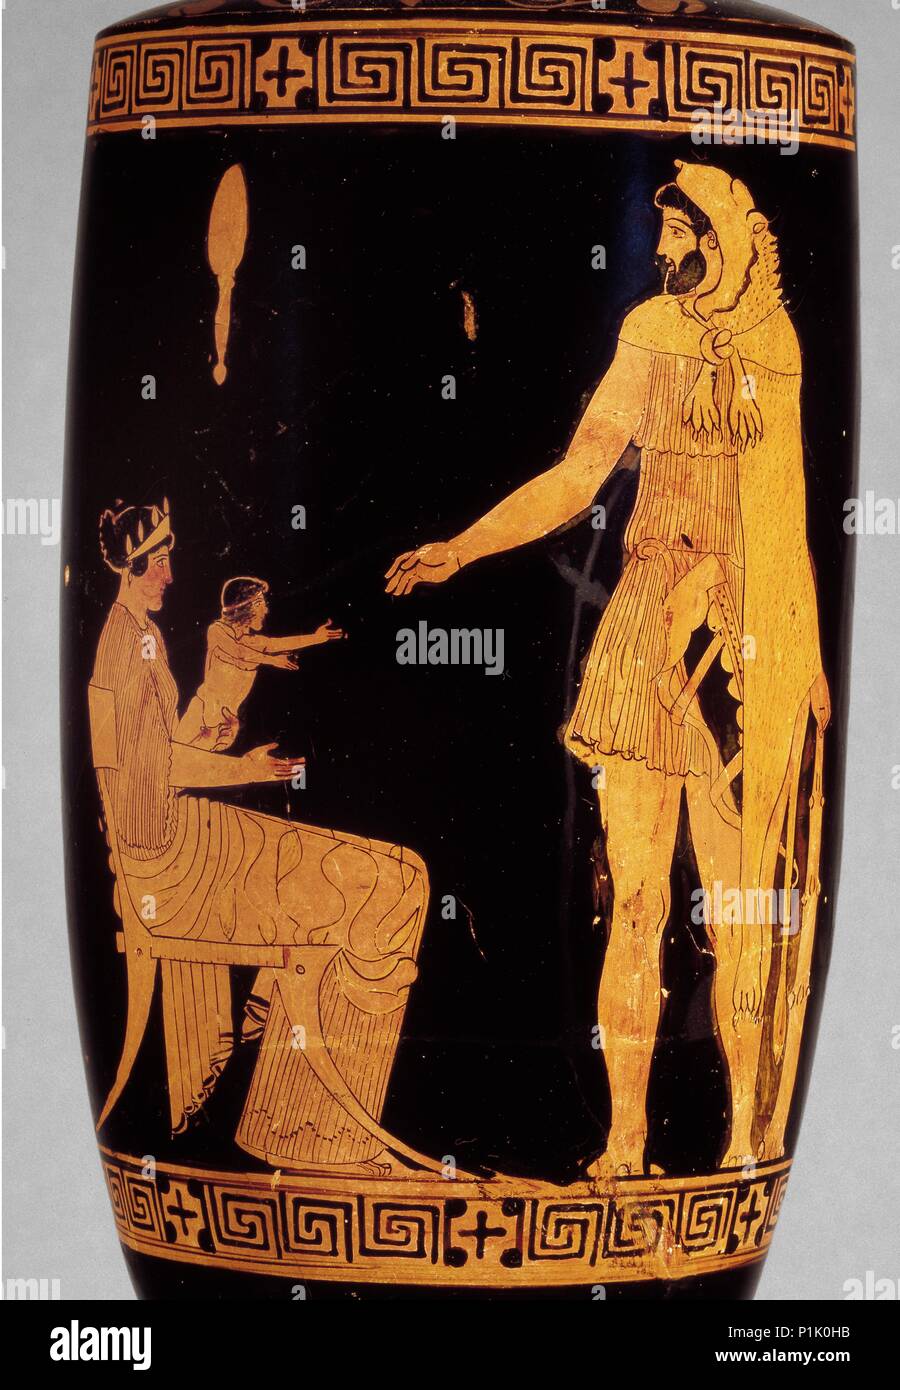 Attic red-figure lekythos with image of Heracles, Dianeira and Hyllos, 5th century BC. Artist: Villa Giulia Painter. Stock Photo